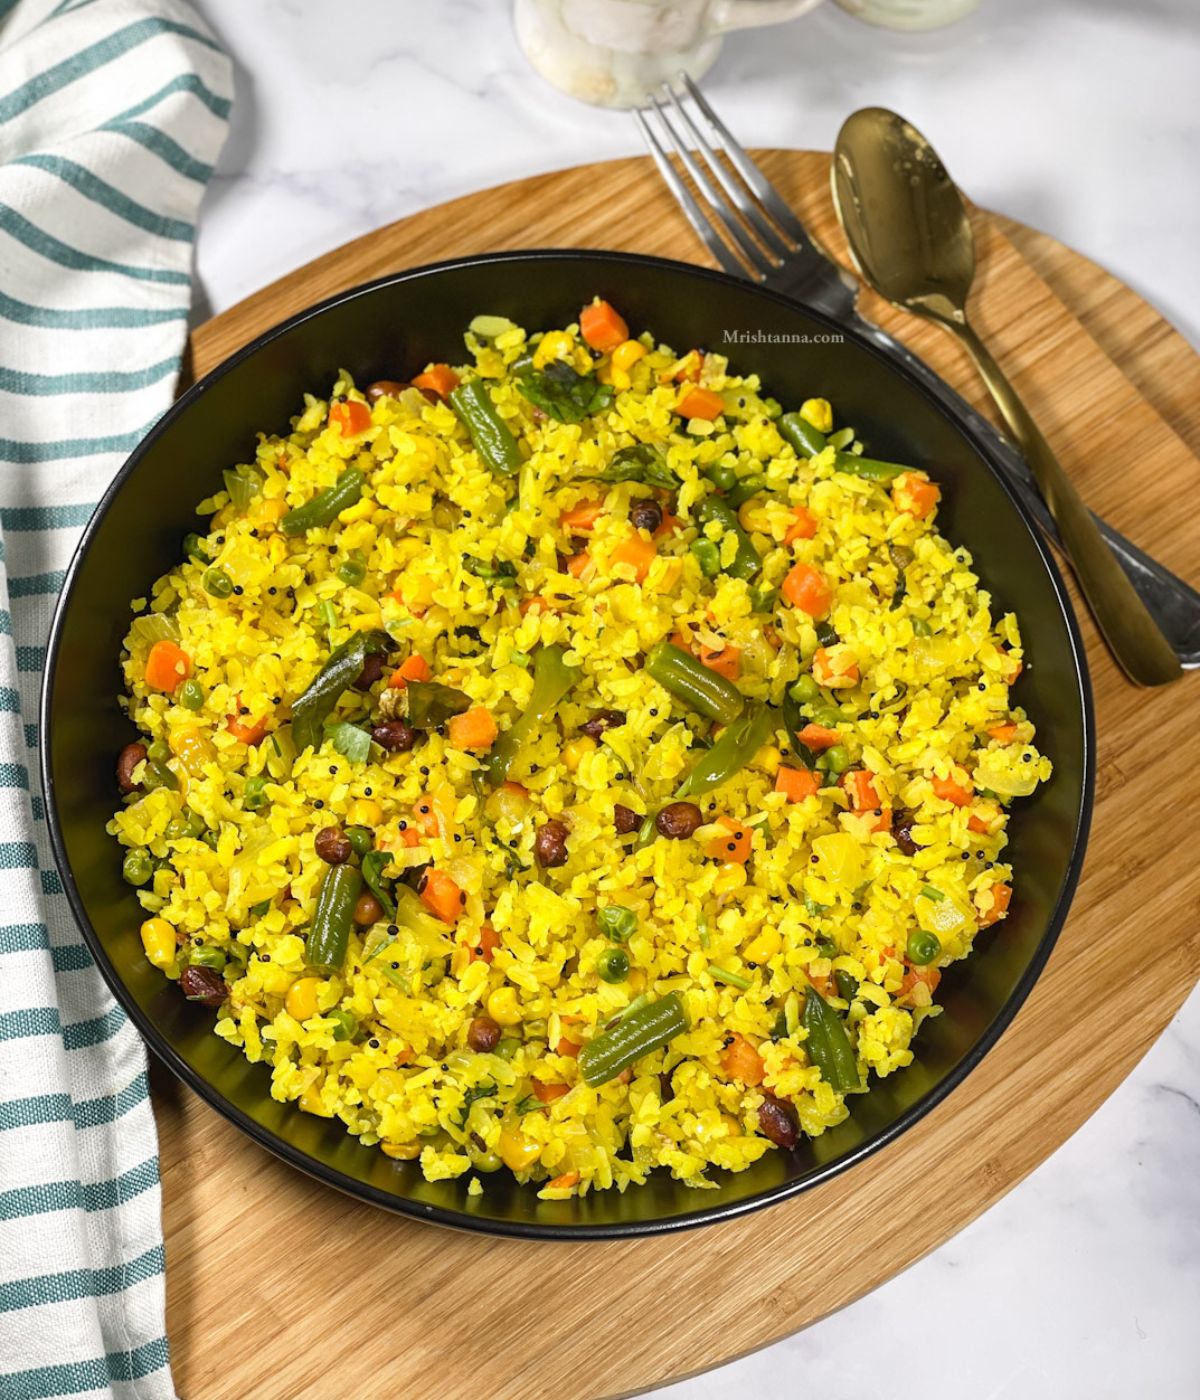 A plate of vegetable poha is on the wooden tray with a fork and spoon by the side.